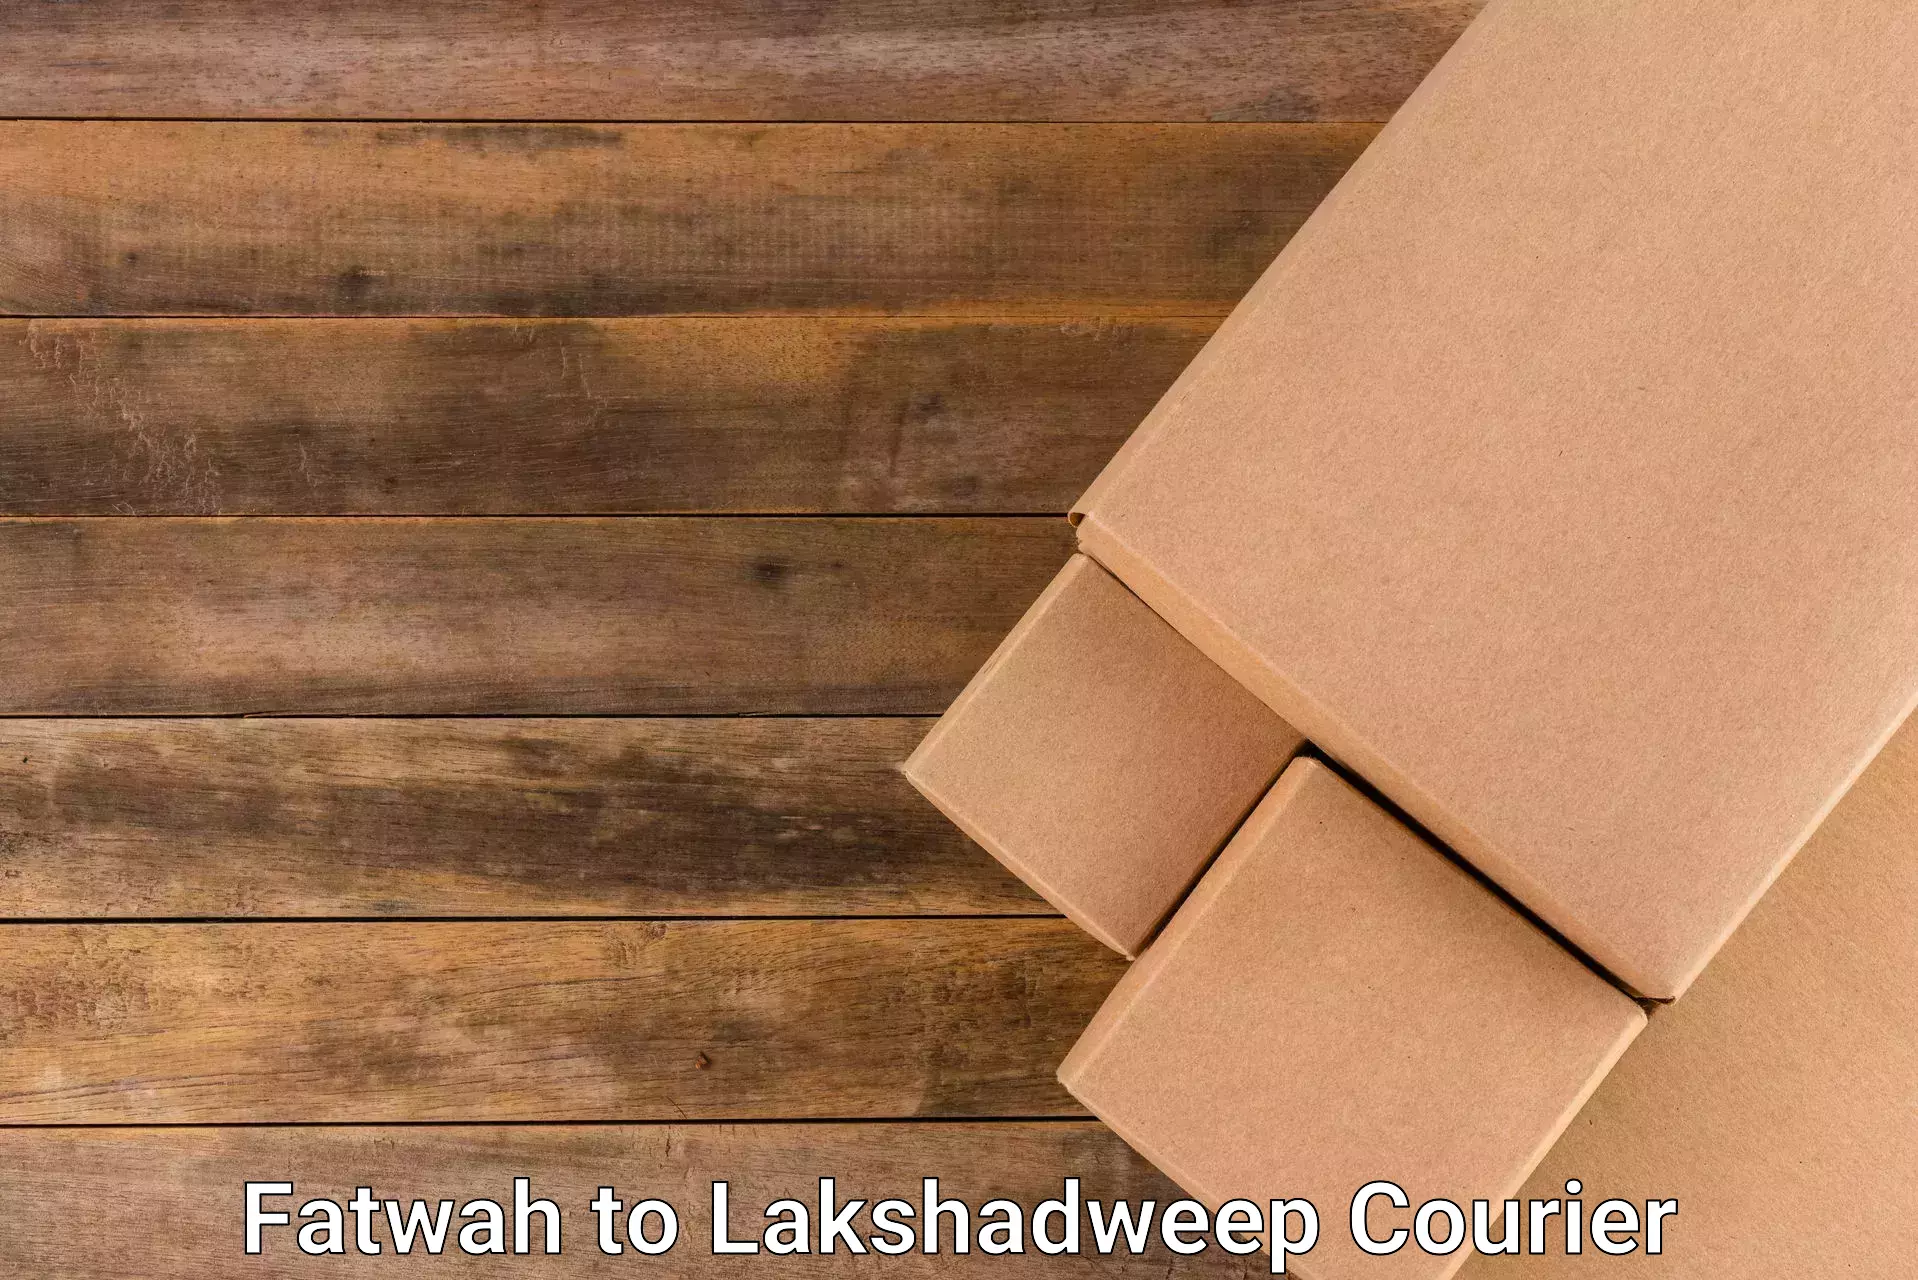 Package delivery network Fatwah to Lakshadweep